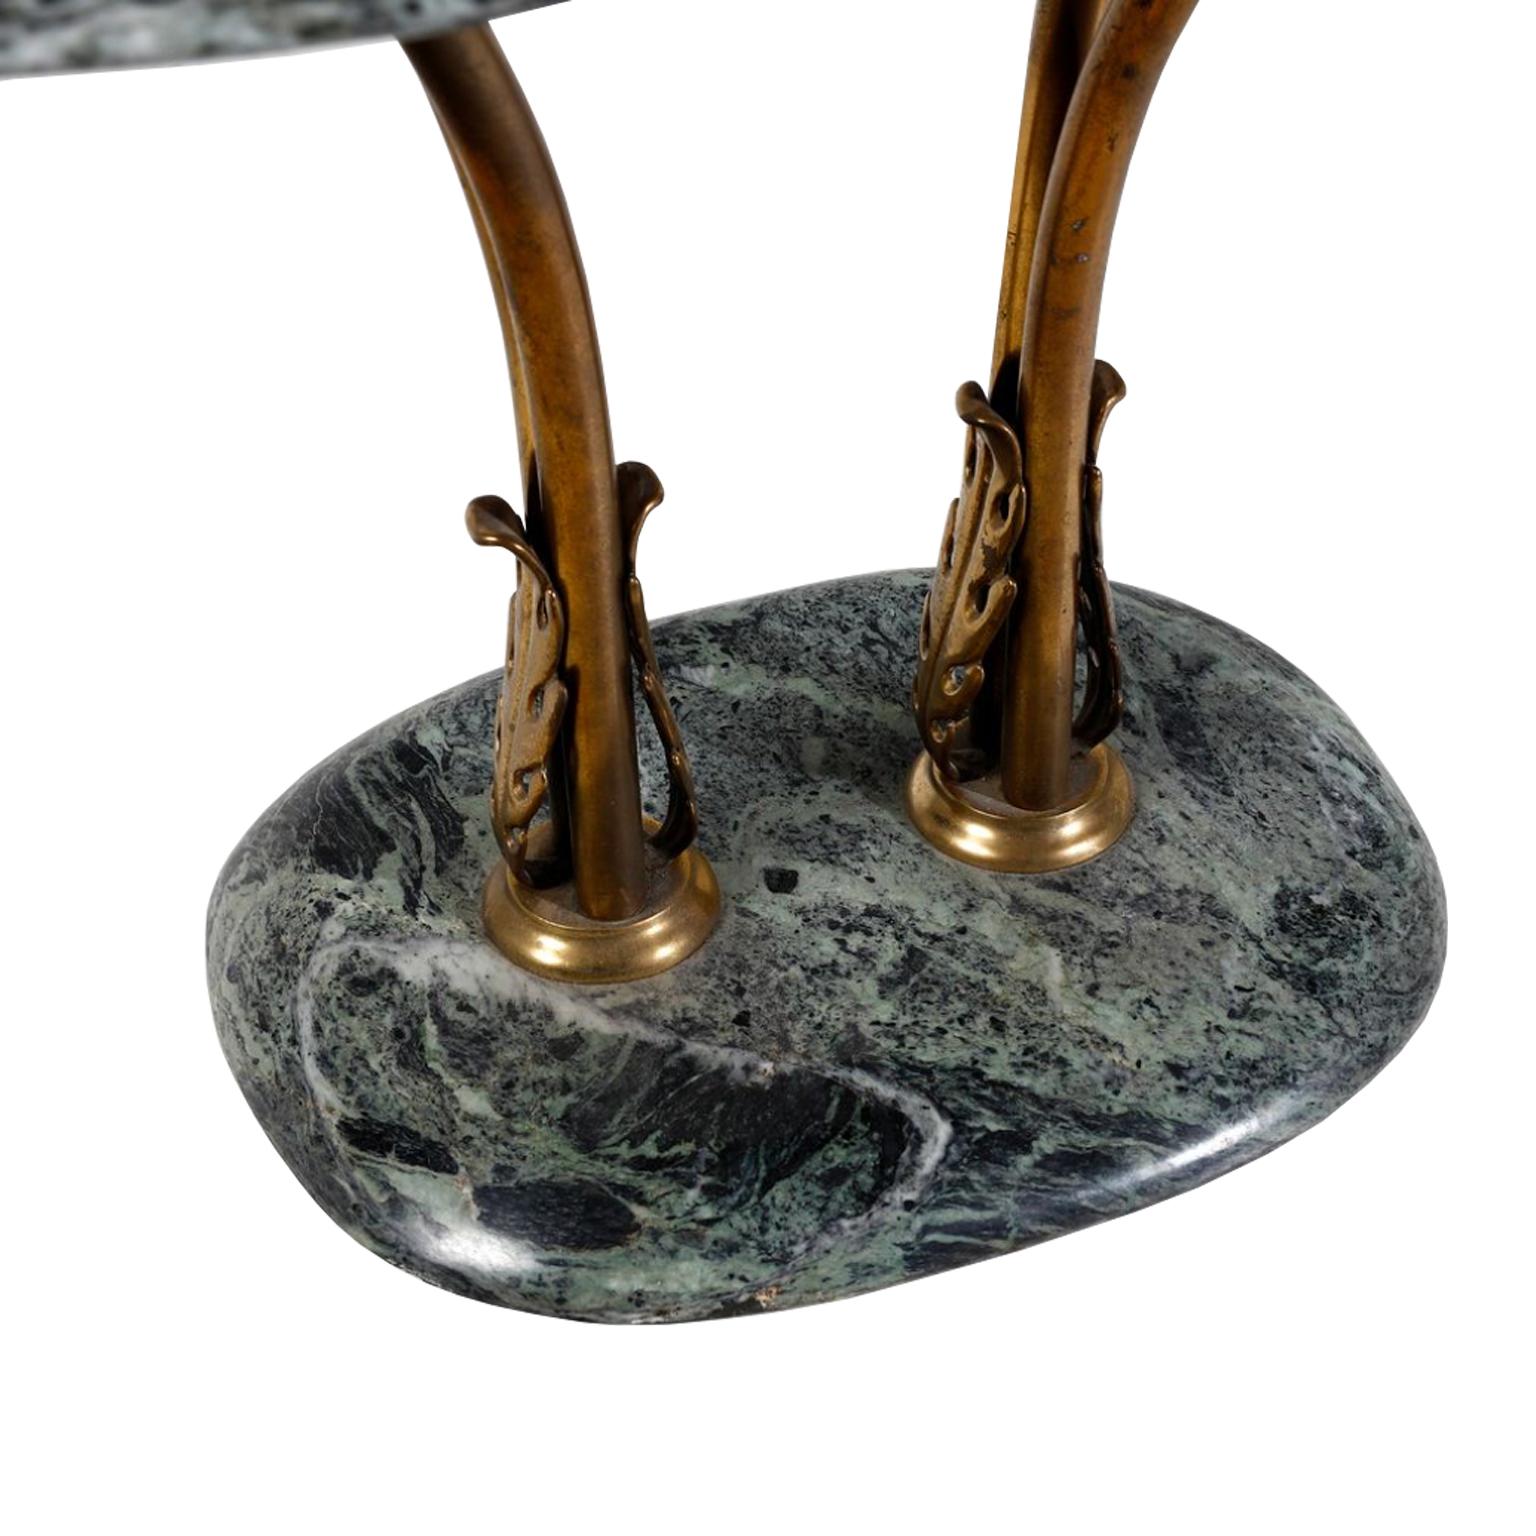 Vintage oval side table with green marble top and base.  This piece showcases metal legs in bronze that highlight a stylized leaf motif on either side.  The top of the legs overly arch to support the oval marble. 